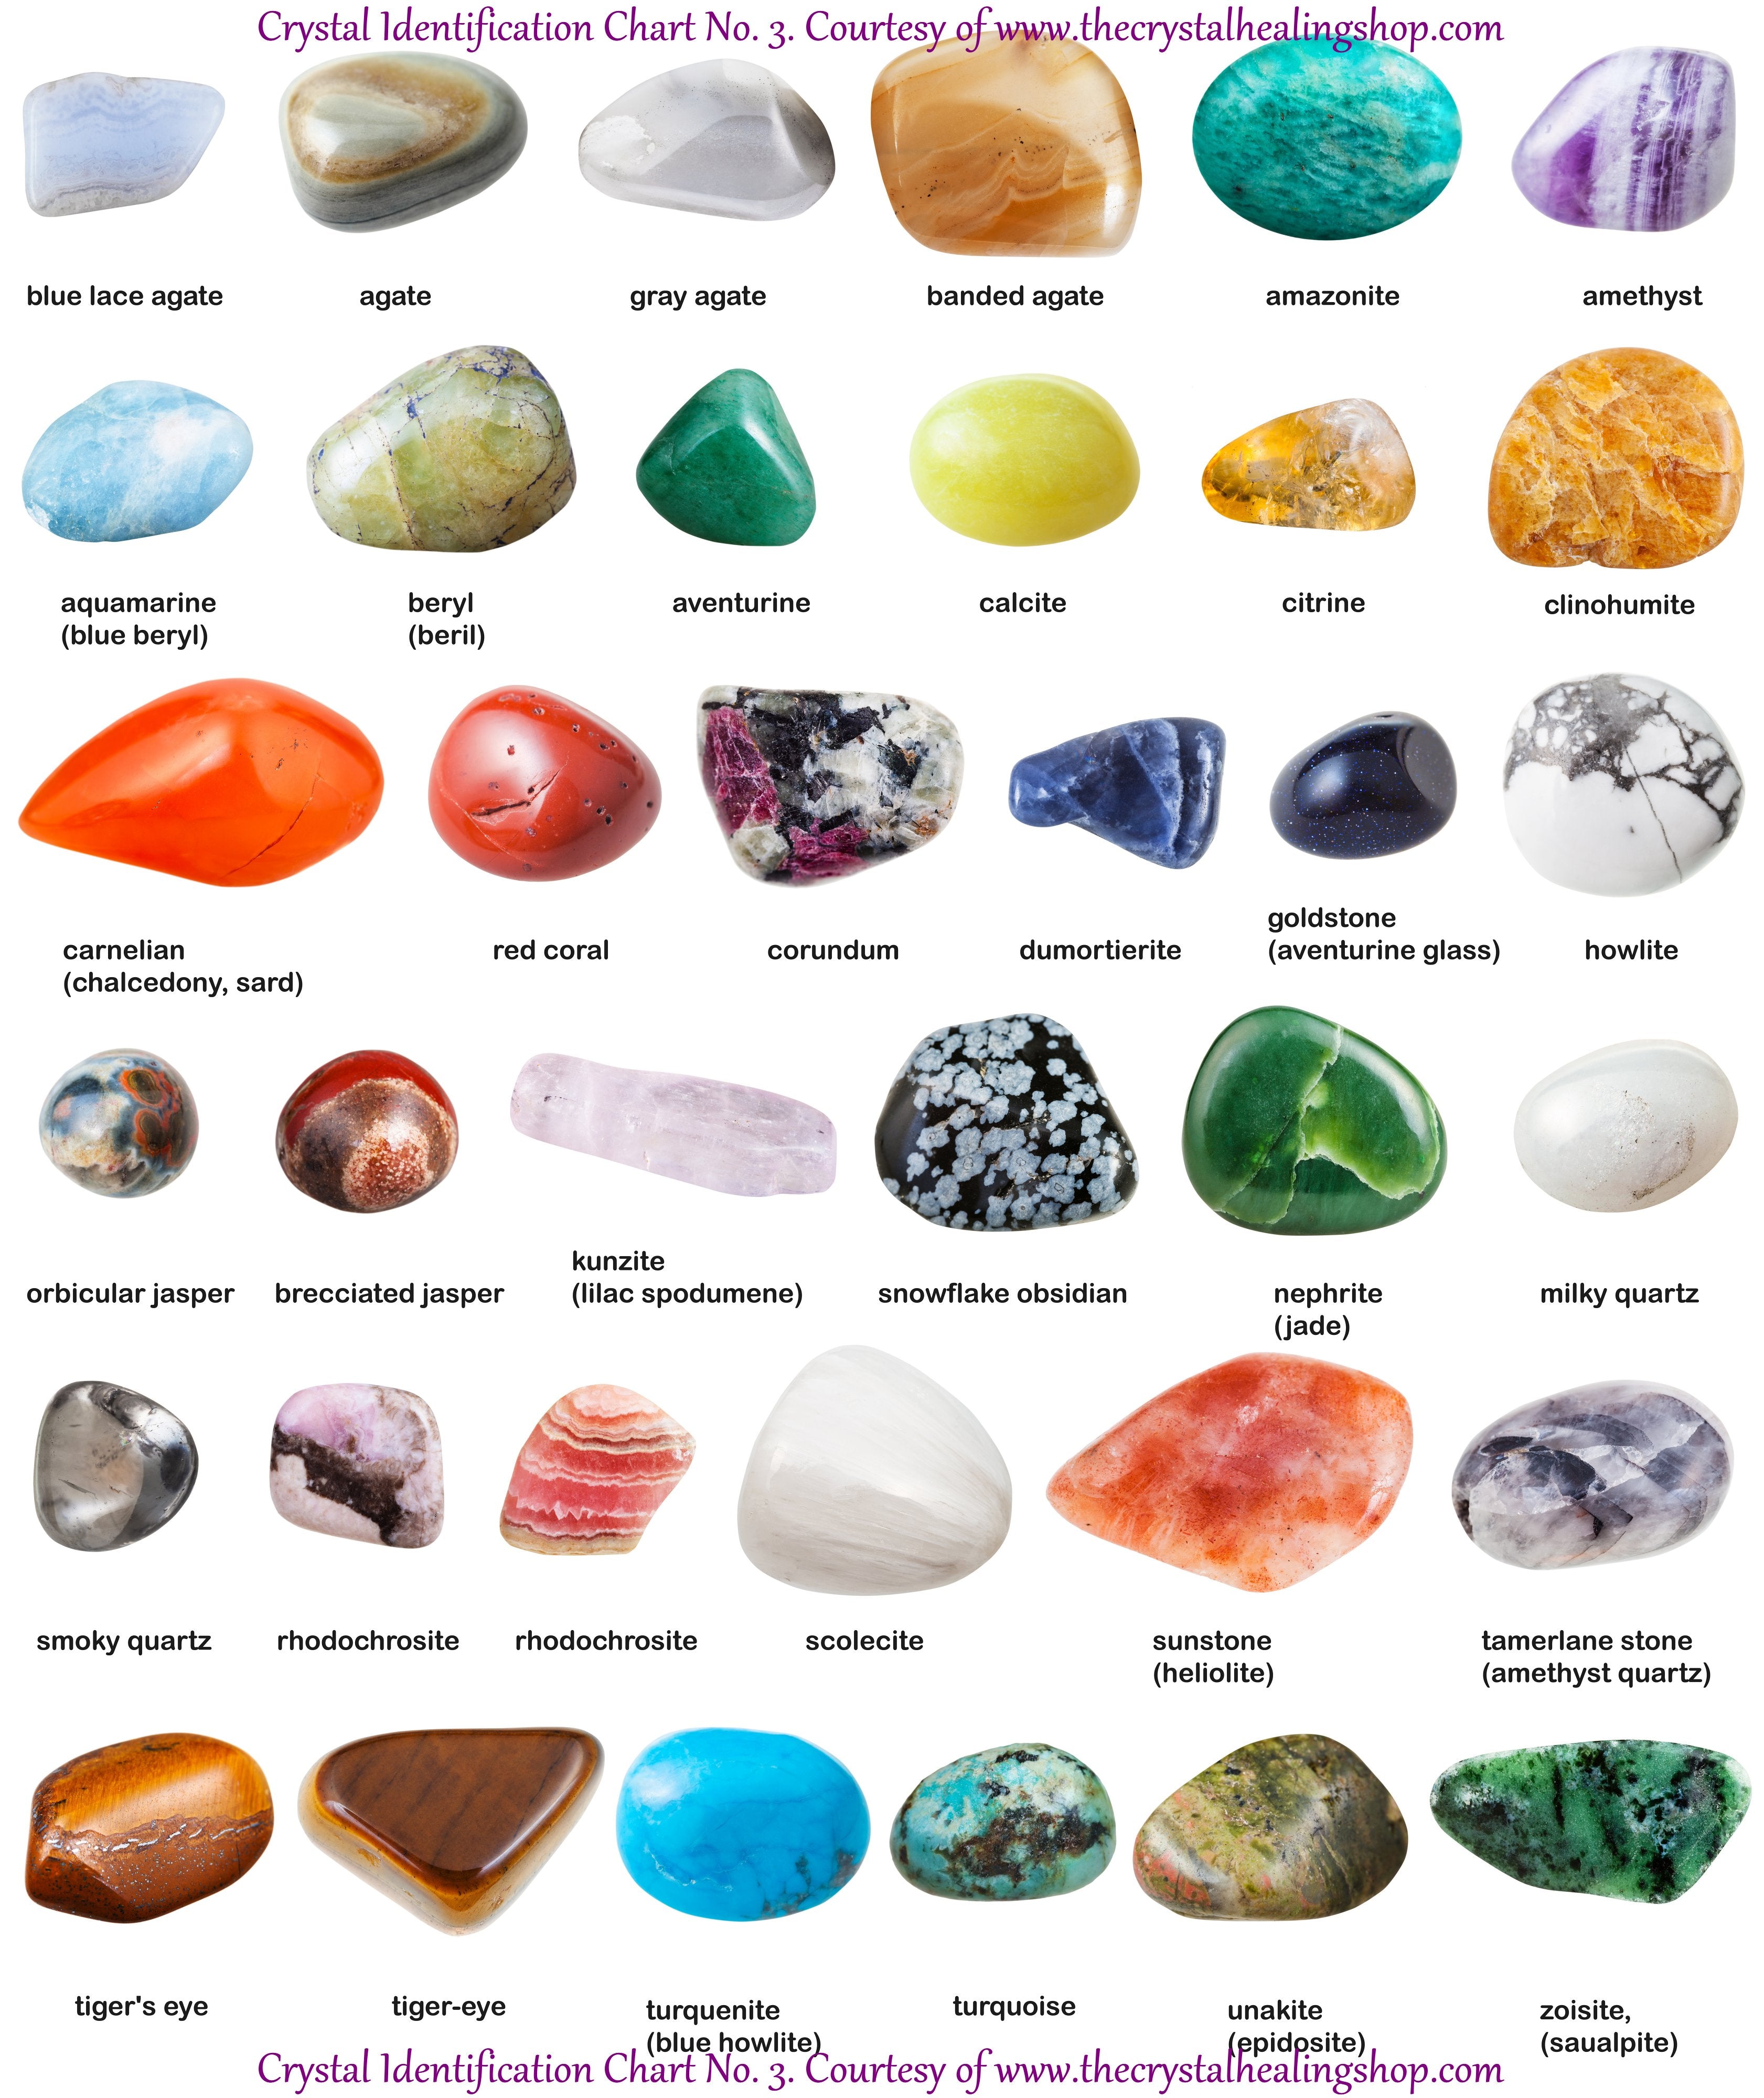 Crystal Identification Chart No. 3 – The Crystal Healing Shop